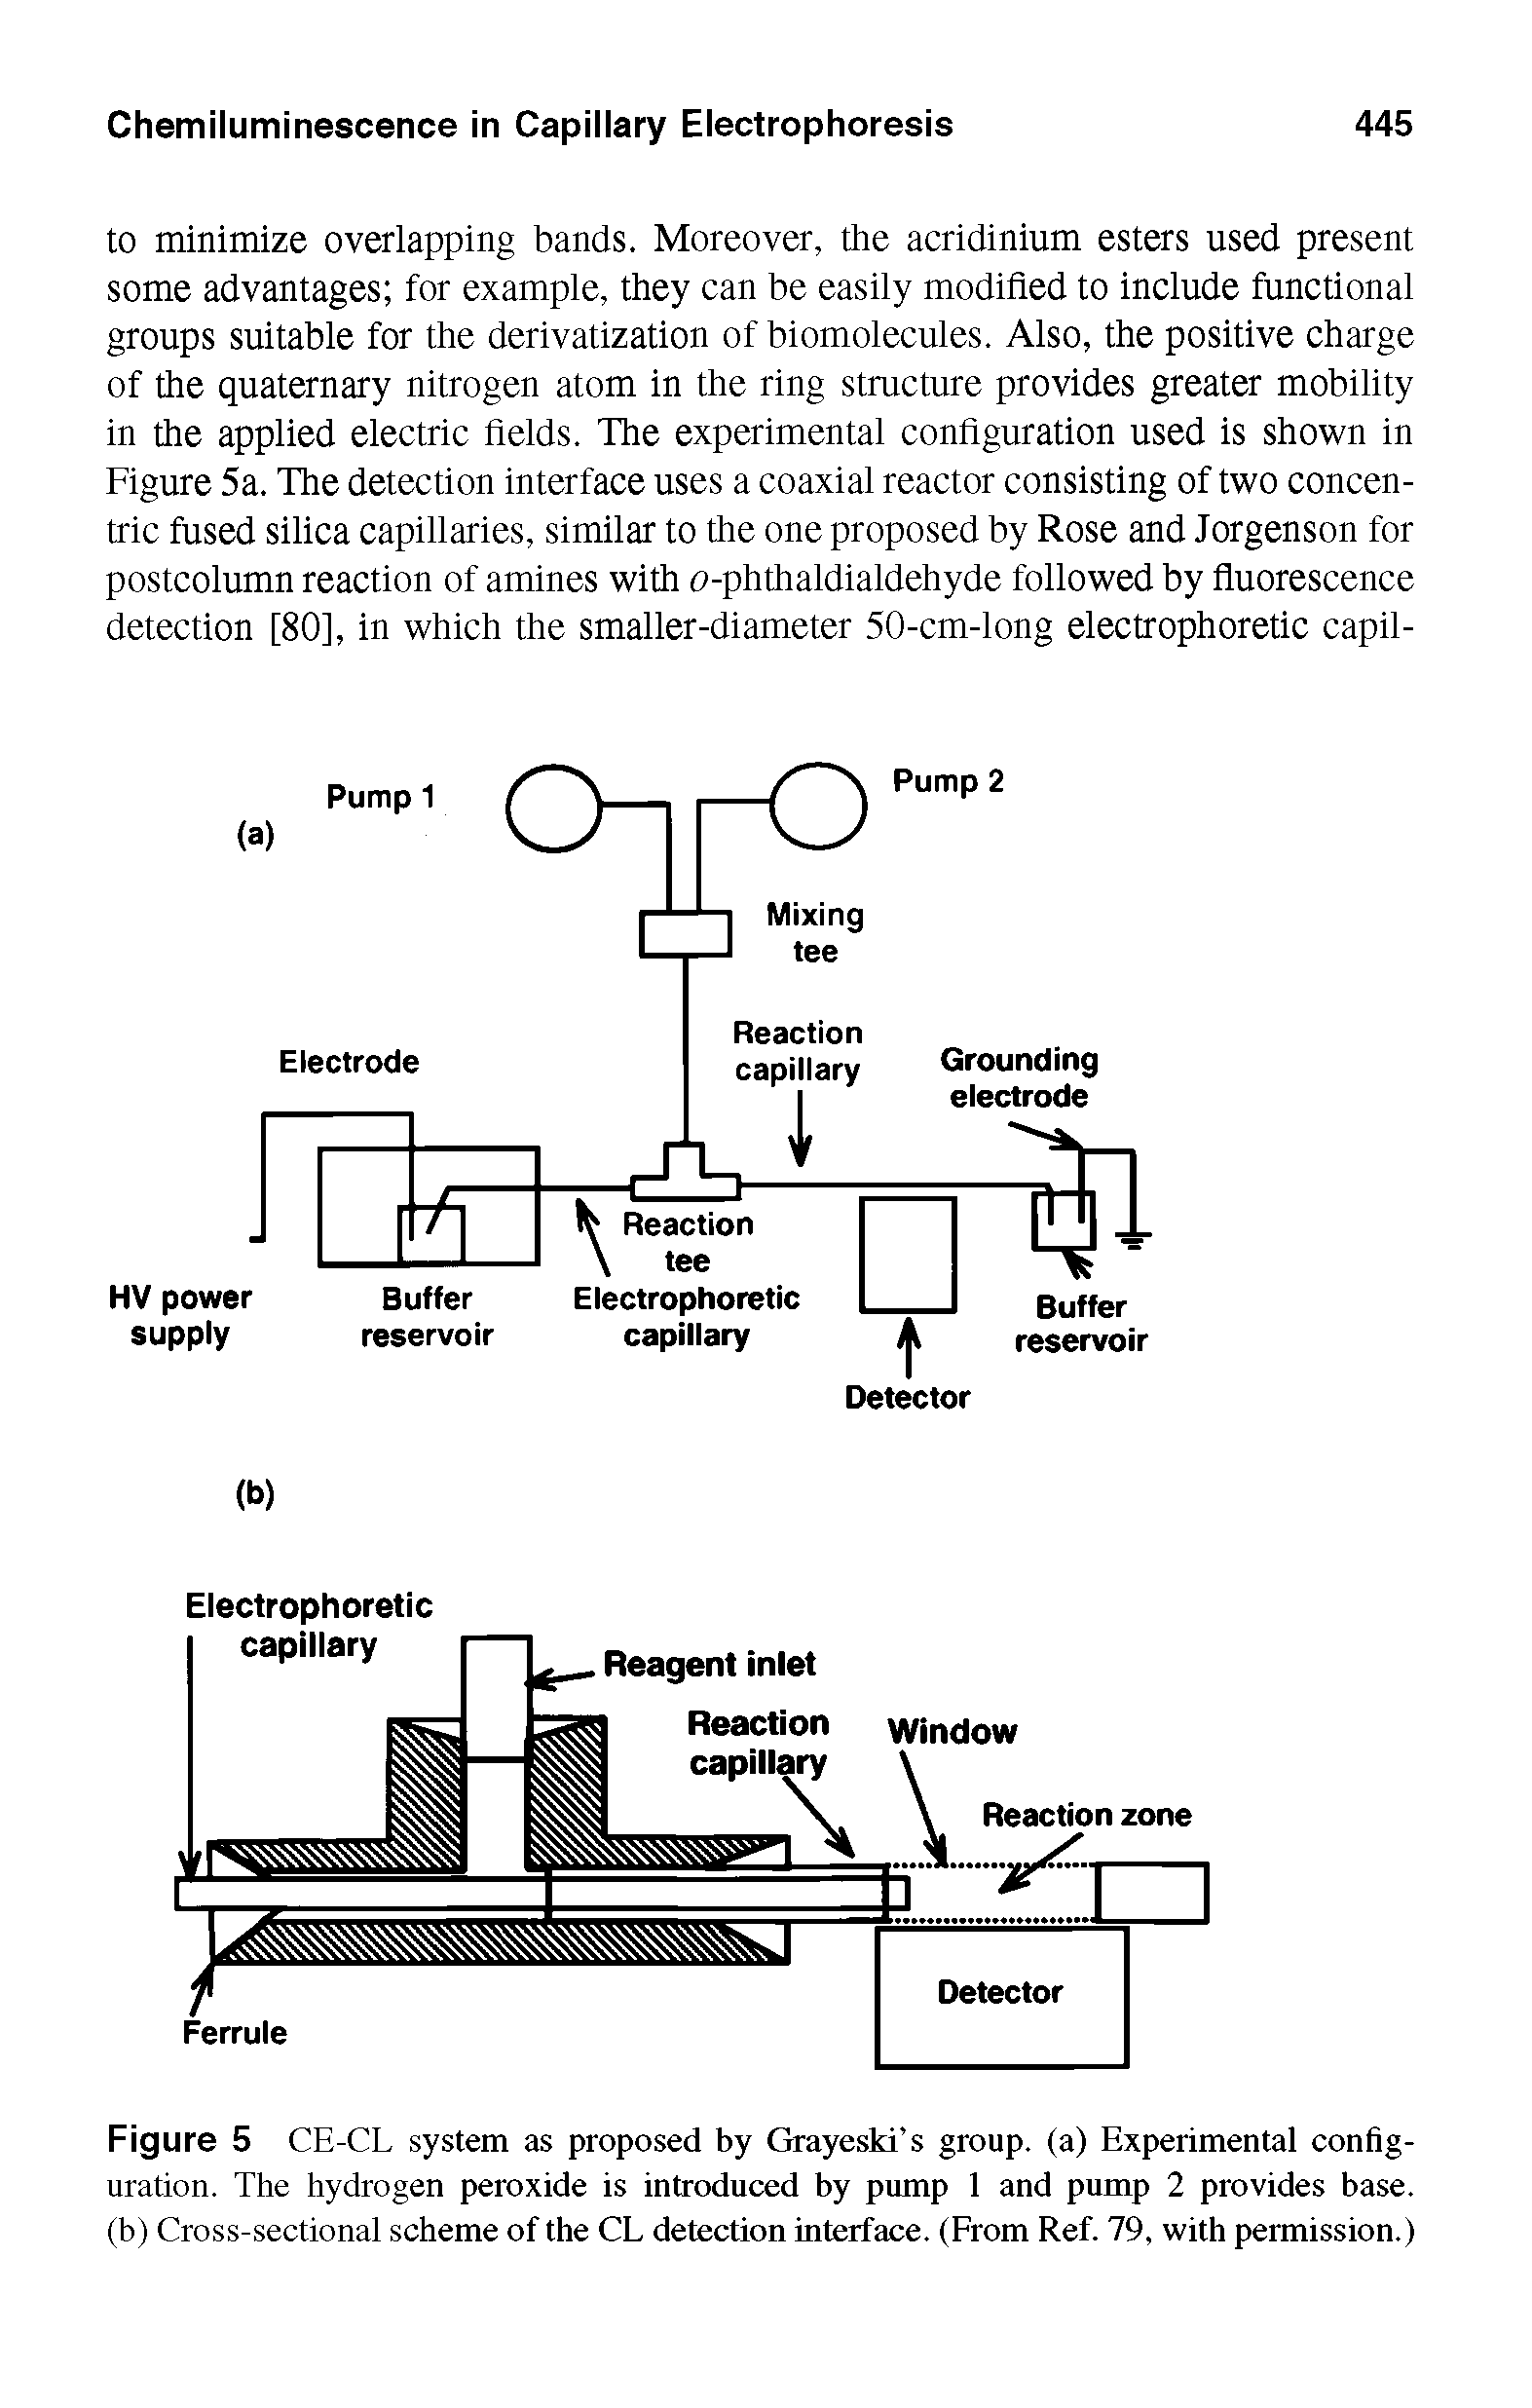 Figure 5 CE-CL system as proposed by Grayeski s group, (a) Experimental configuration. The hydrogen peroxide is introduced by pump 1 and pump 2 provides base, (b) Cross-sectional scheme of the CL detection interface. (From Ref. 79, with permission.)...